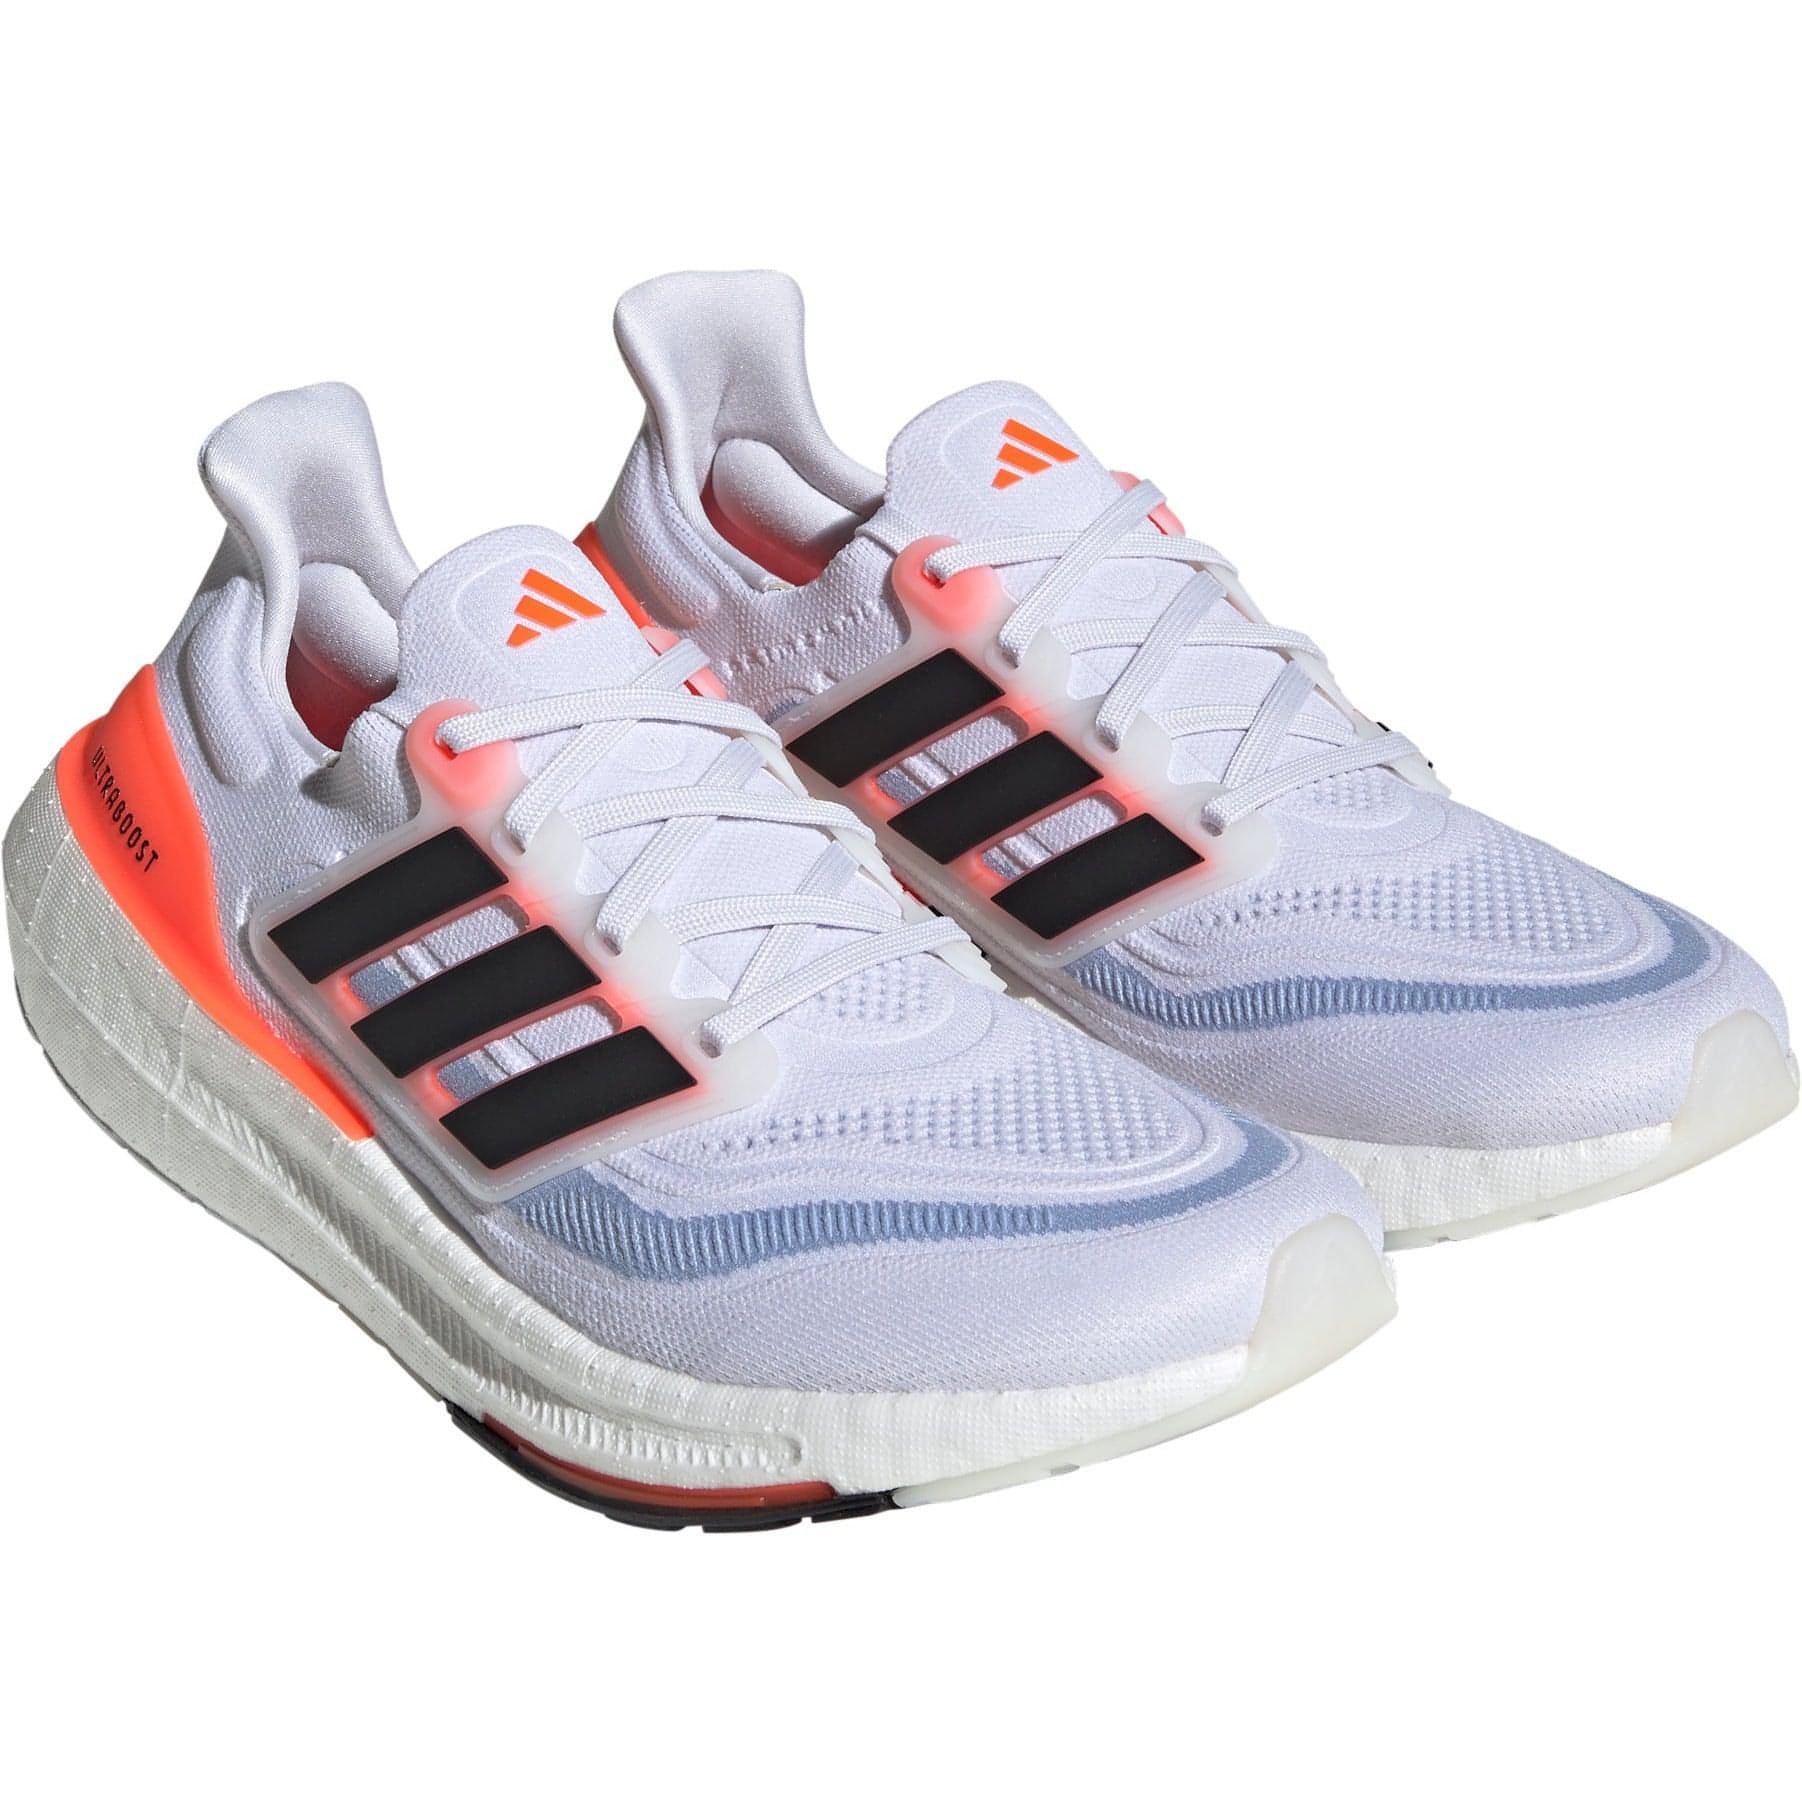 Adidas Ultra Boost Light Hq6351 Front - Front View